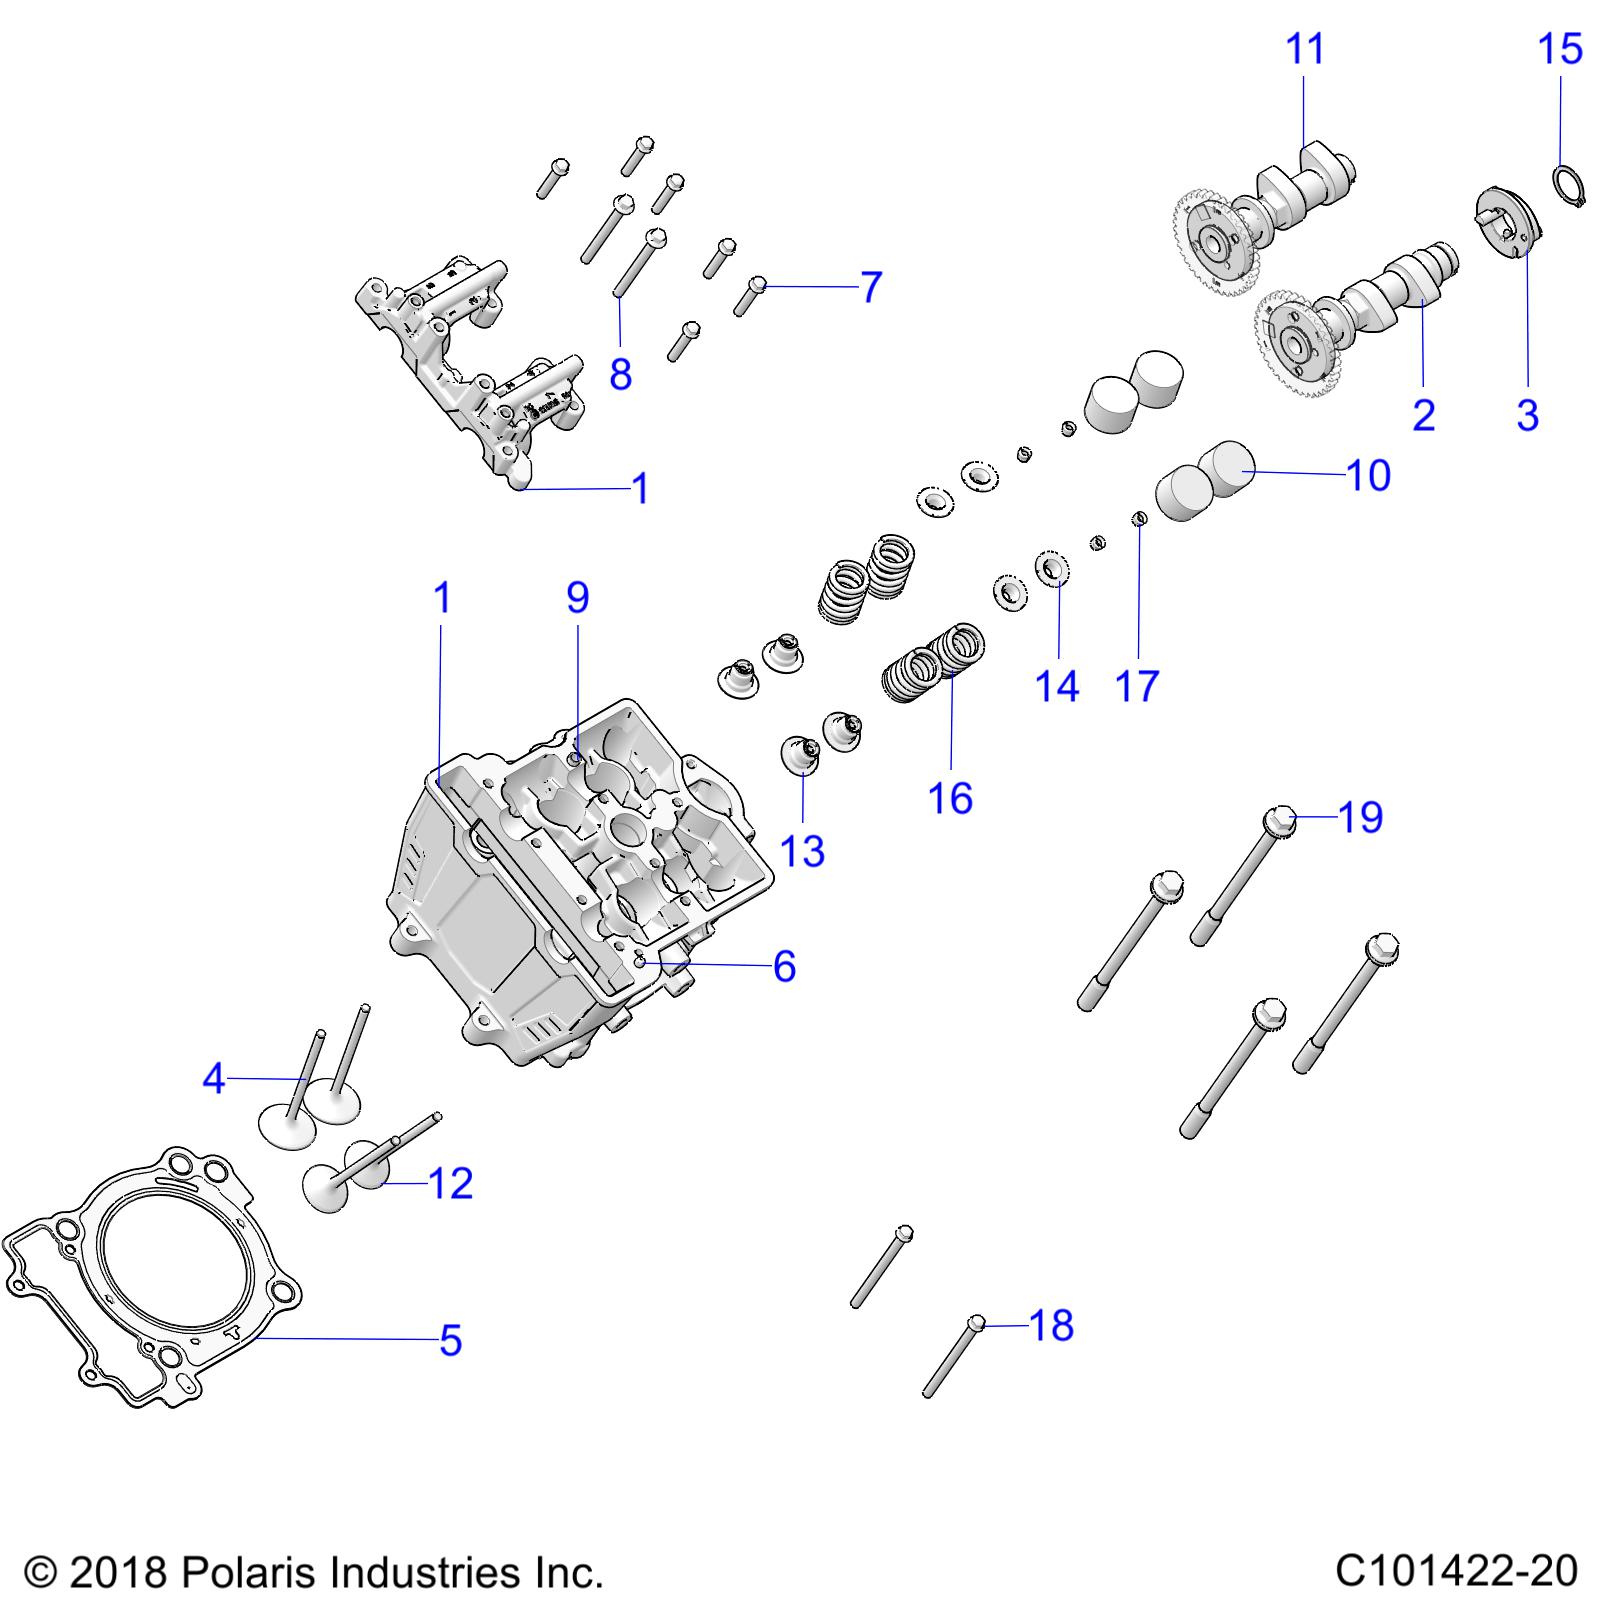 ENGINE, CYLINDER HEAD, CAMS and VALVES - A20SEF57C1/S57C1/C2/C5/C9/CK/CY/F1/F2